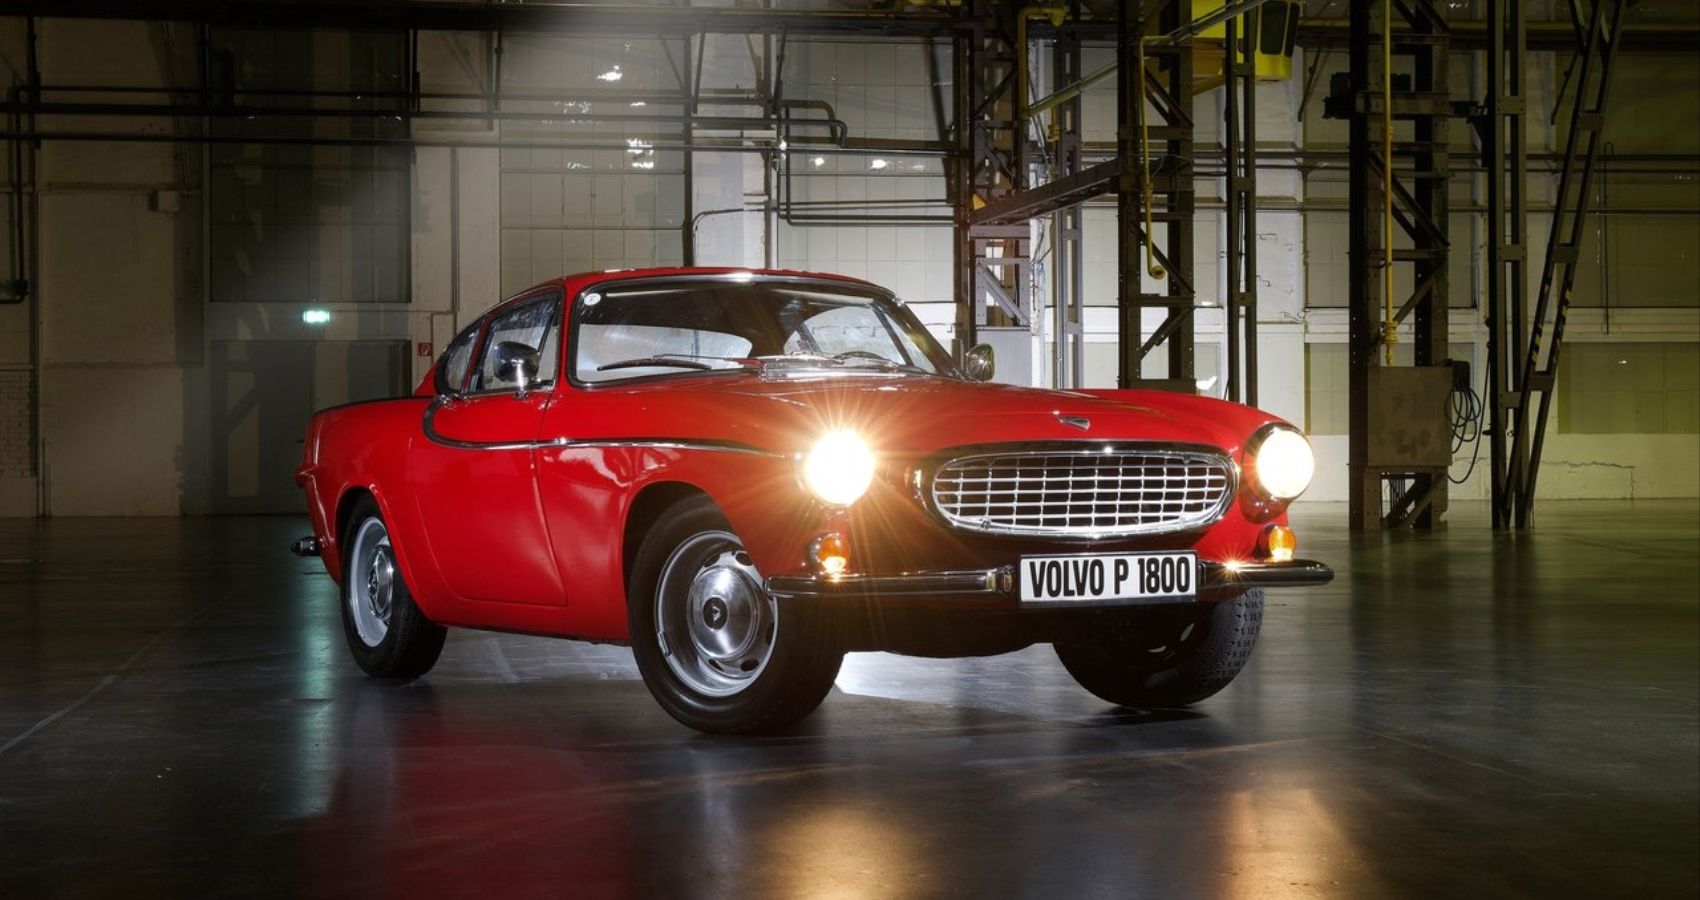 Why You Wont Regret Buying The Volvo P1800 Over A 1961 Chevrolet Corvette